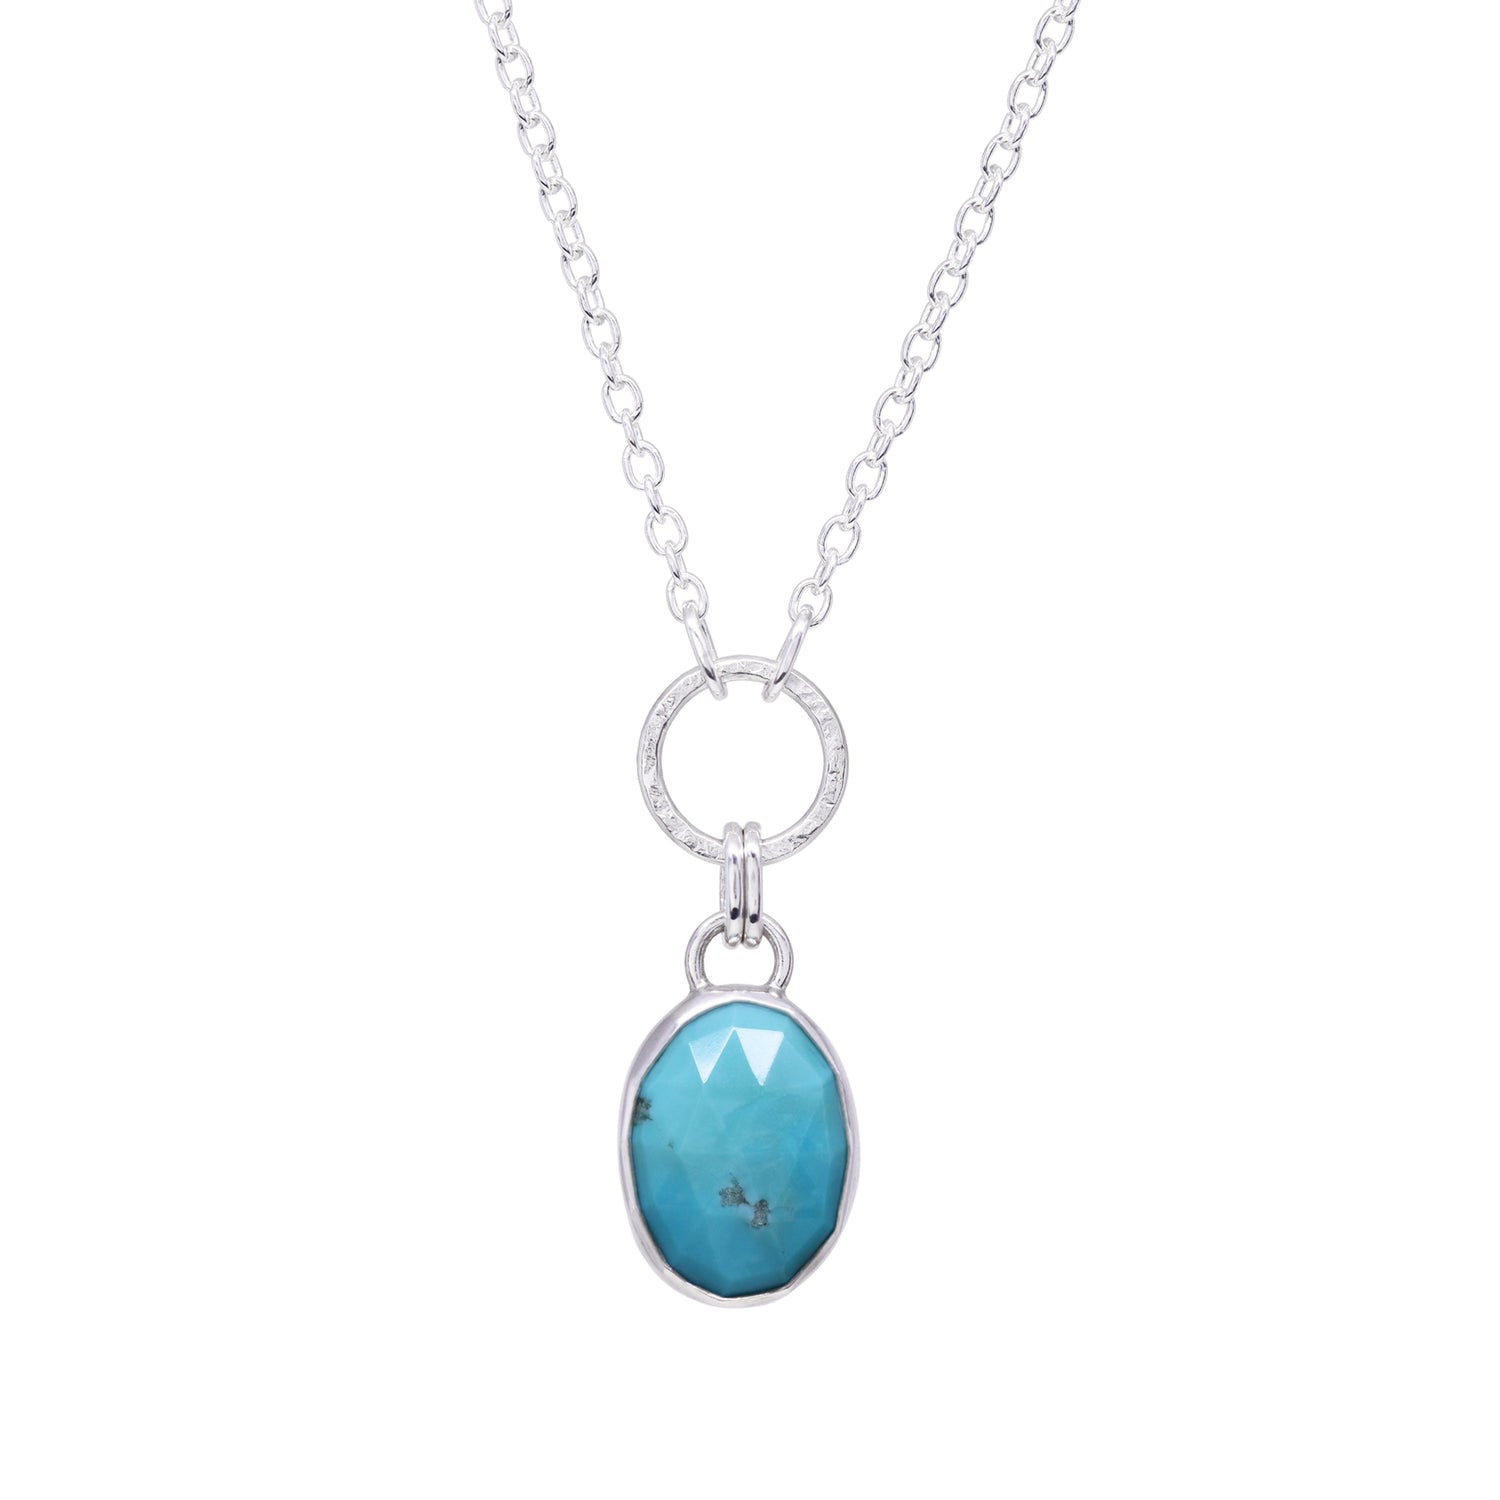 Balance Necklace - Rose Cut Turquoise - Bright Sterling